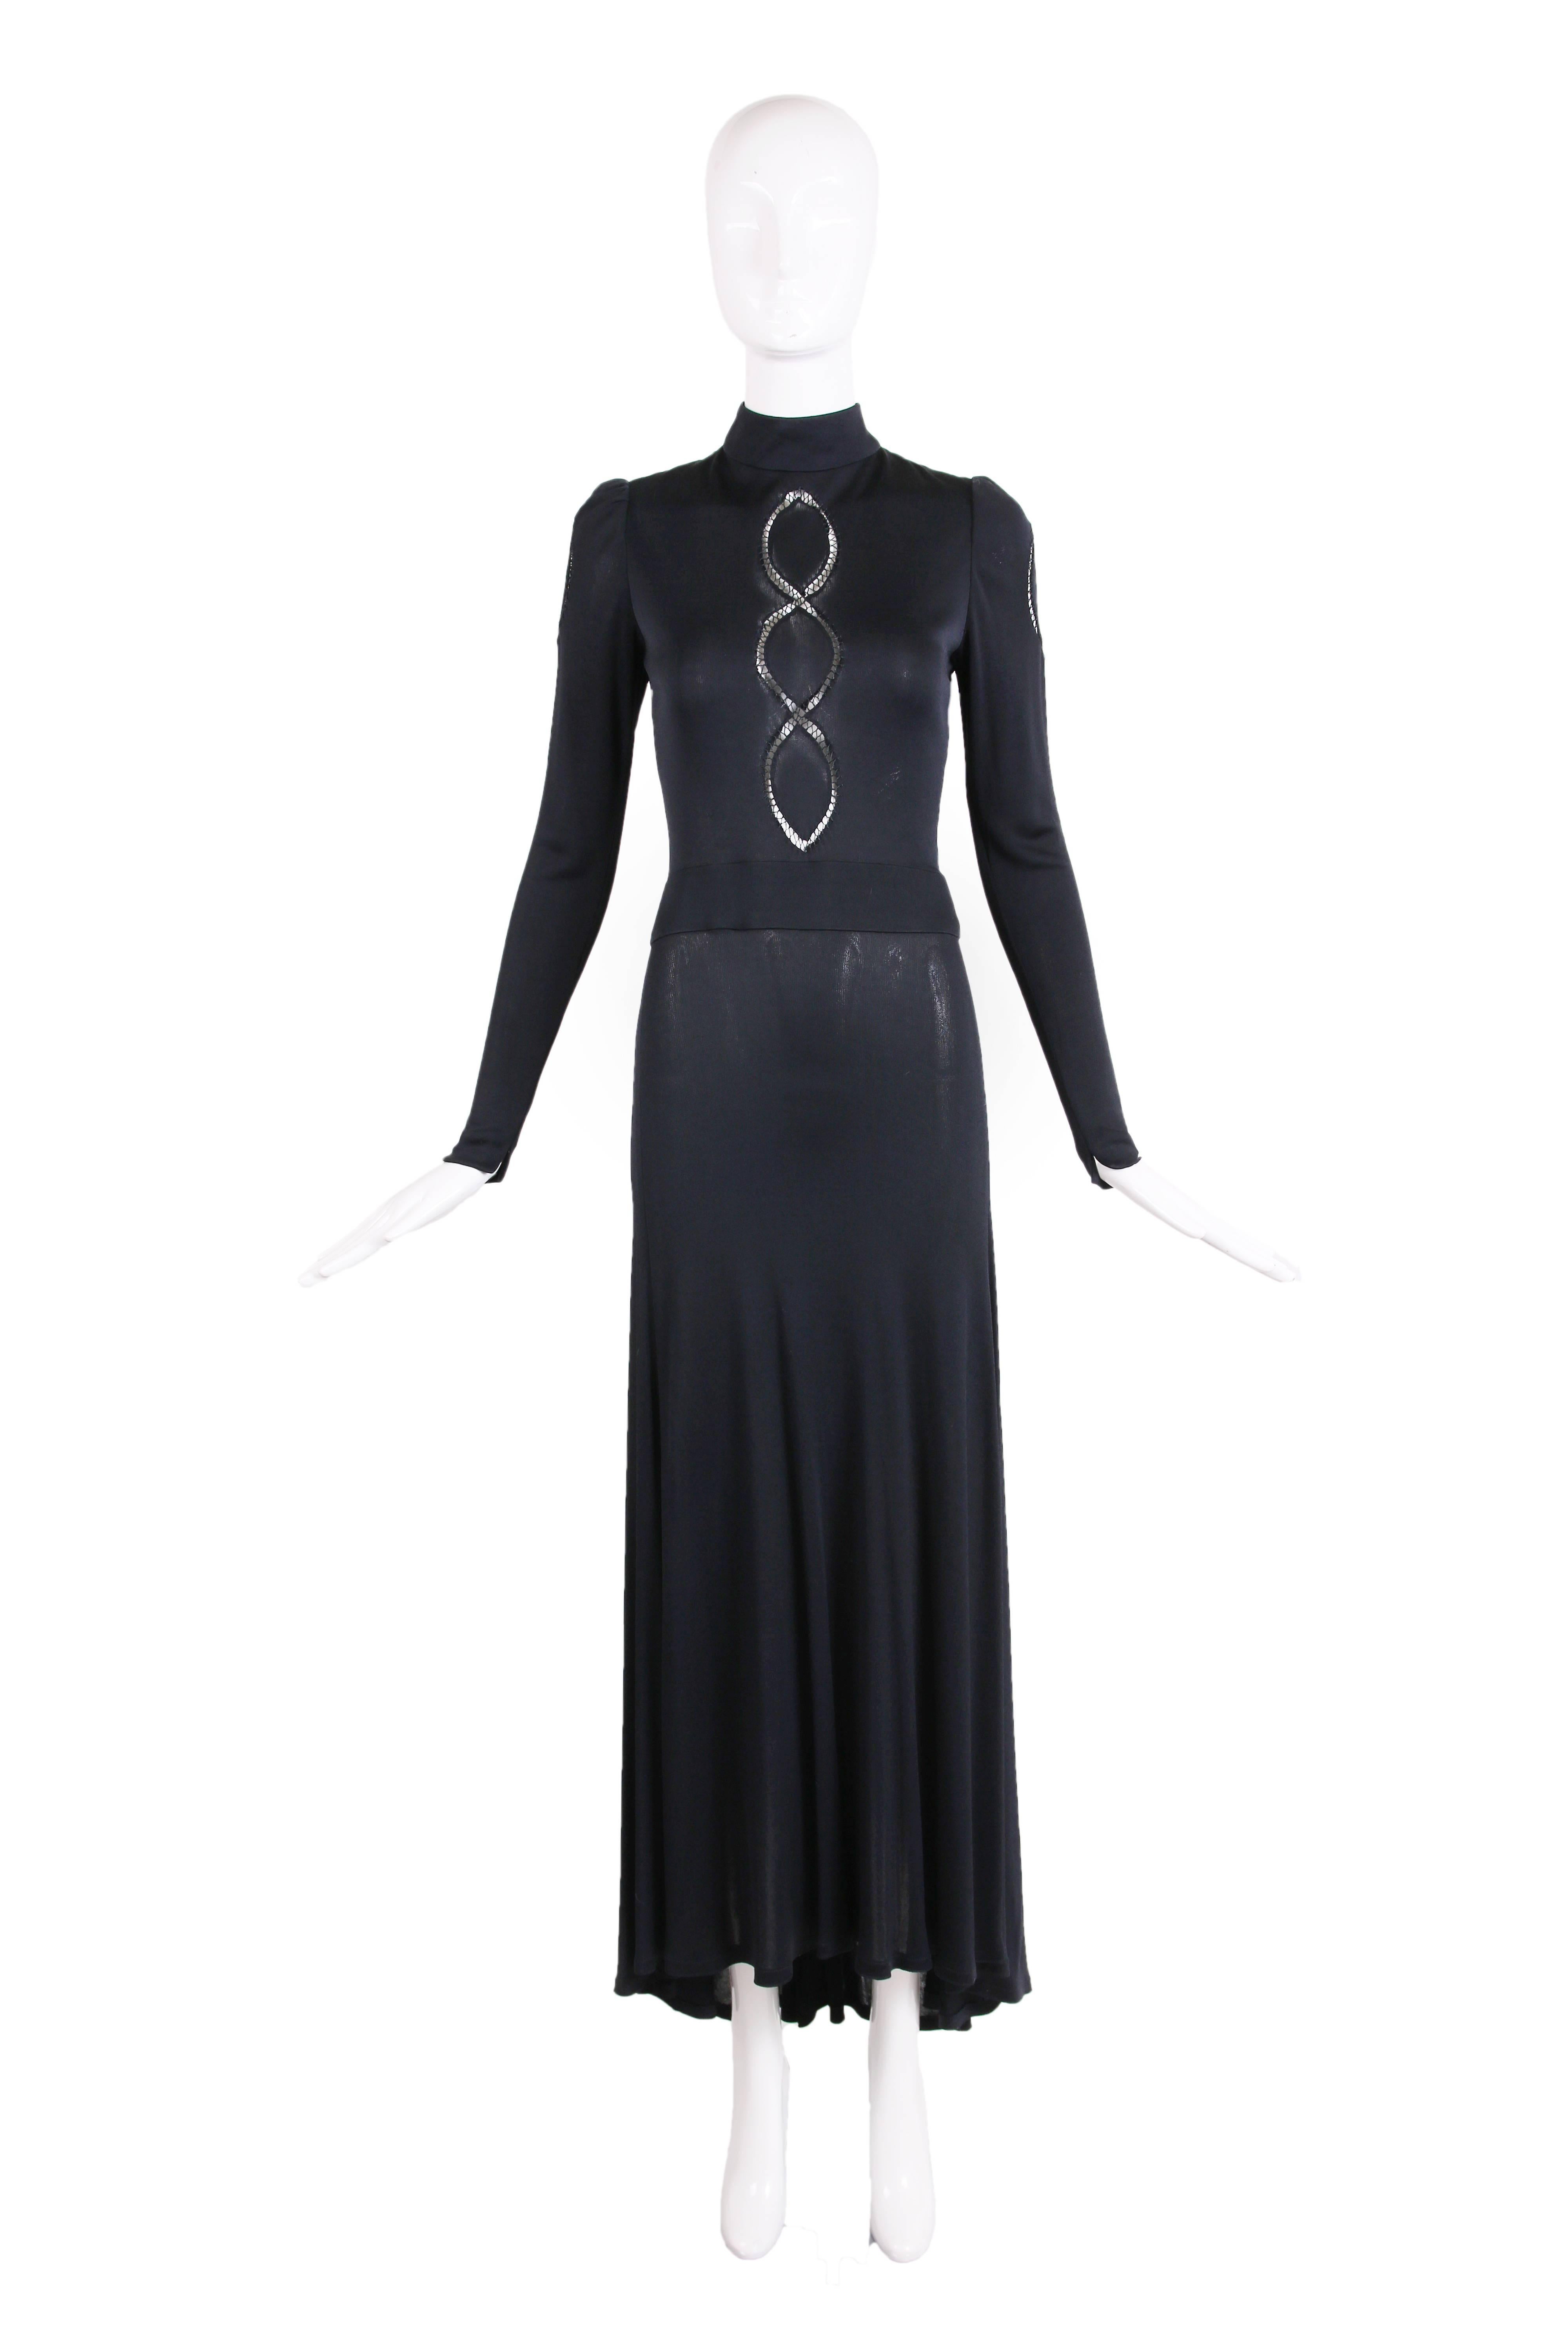 1970's Donald Brooks black jersey long sleeve mock neck maxi dress featuring three oval cut outs with threaded detail down center front and at each upper arm sleeve. The sleeves have a slit at each cuff. There is a thick waist band at the drop